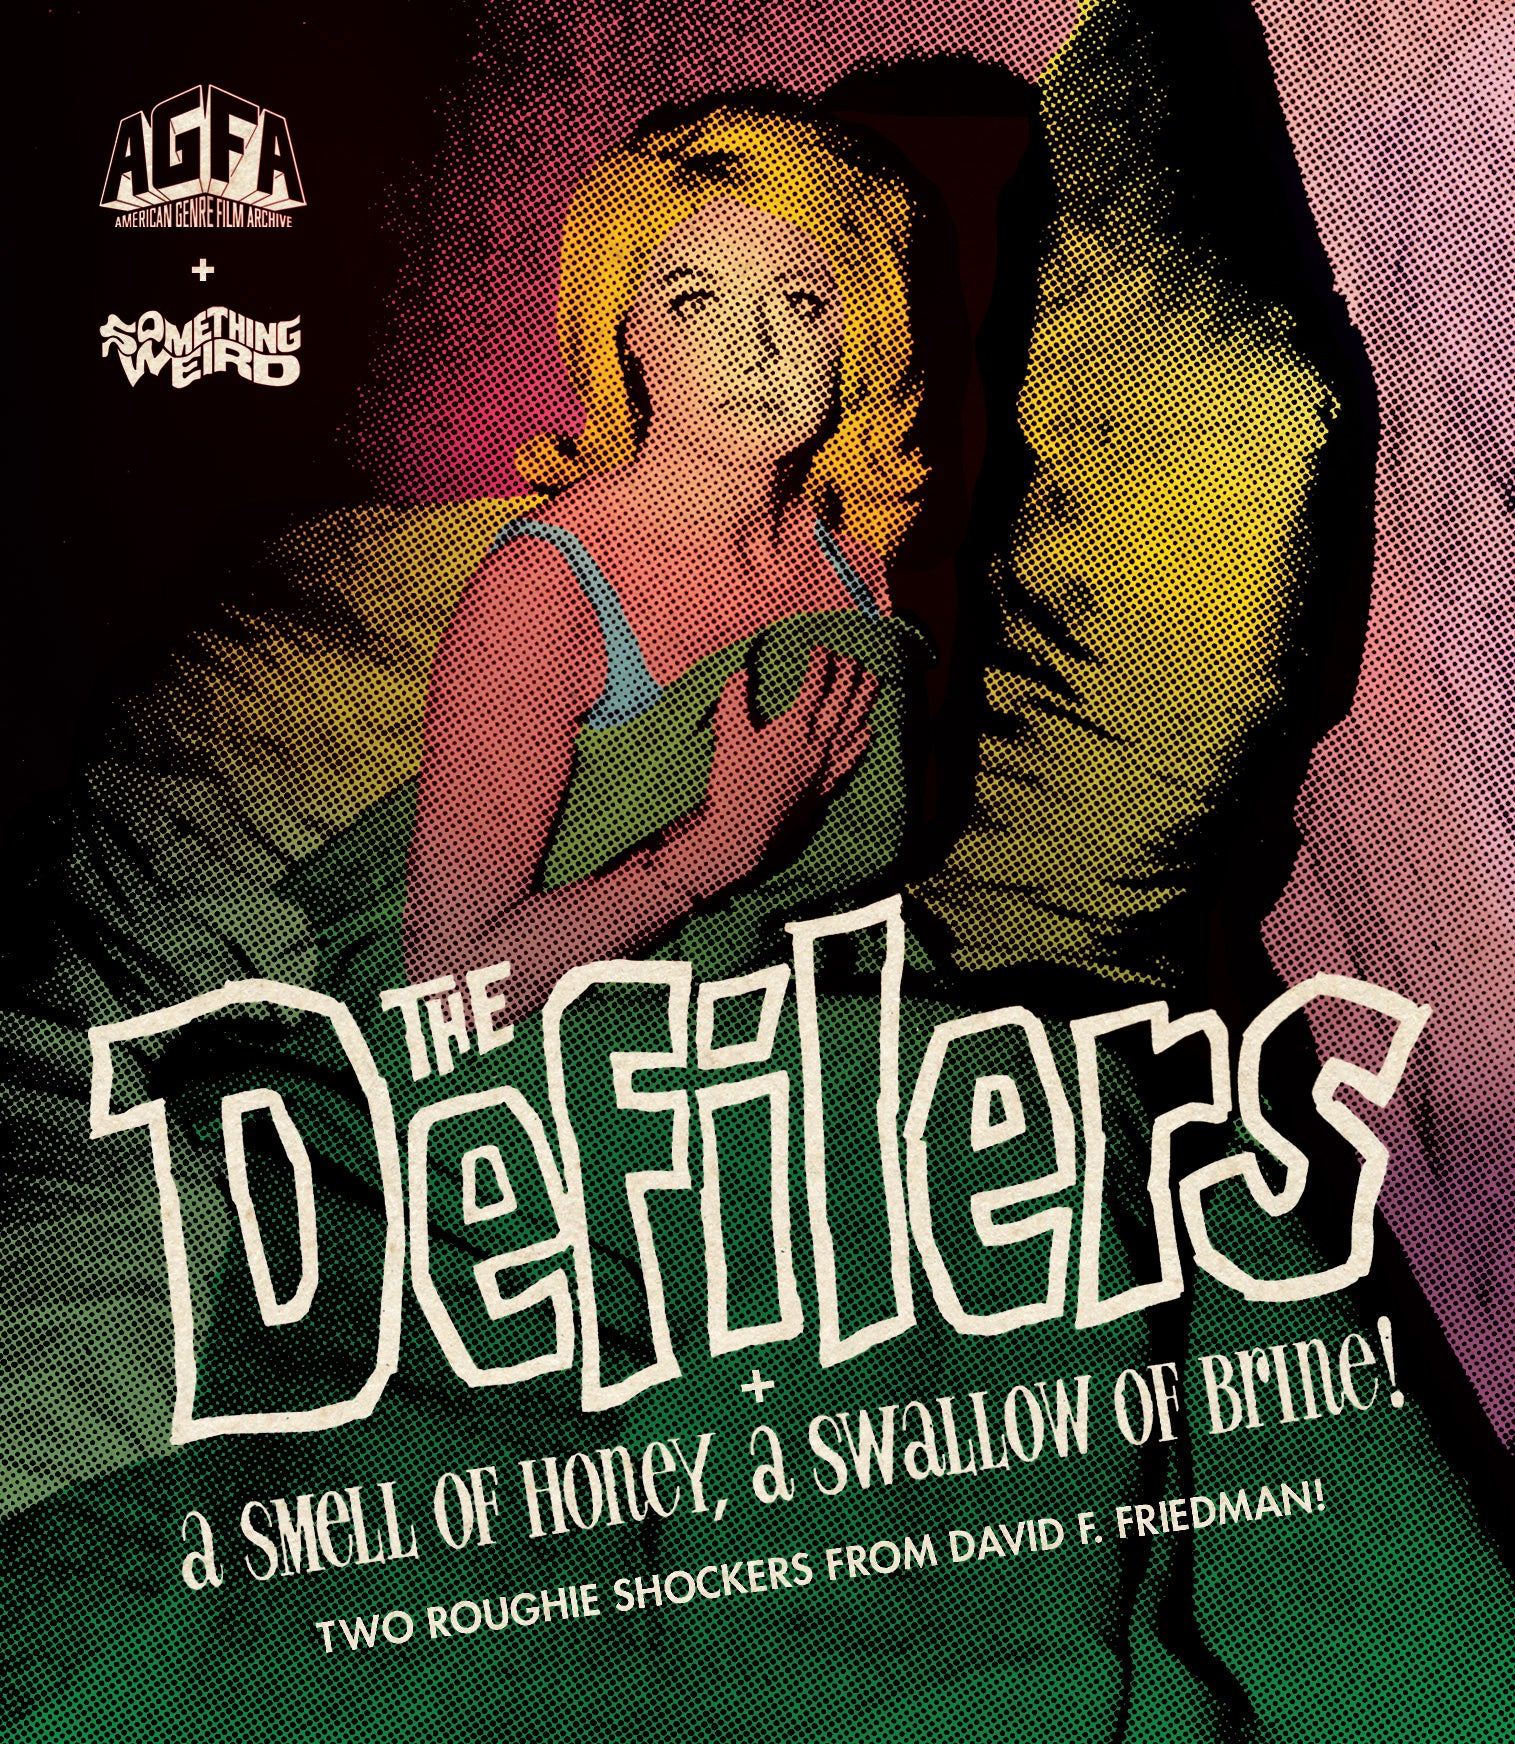 THE DEFILERS / A SMELL OF HONEY, A SWALLOW OF BRINE (LIMITED EDITION) BLU-RAY